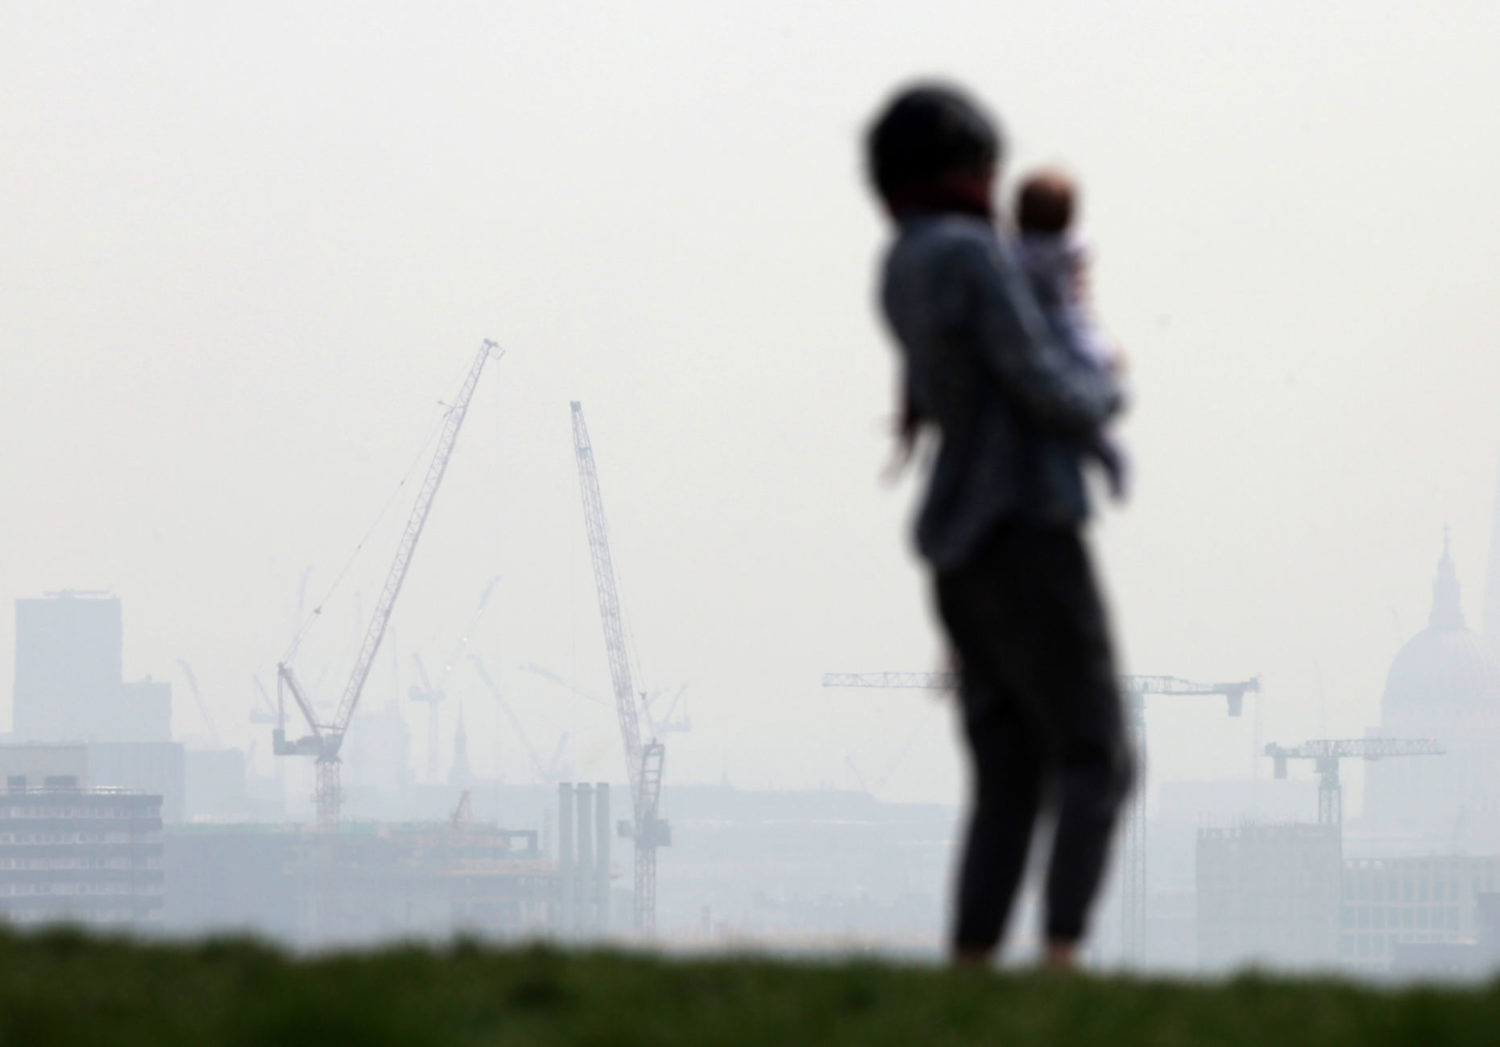 A breath of toxic air - how unsafe levels of air pollution are putting UK children in danger.